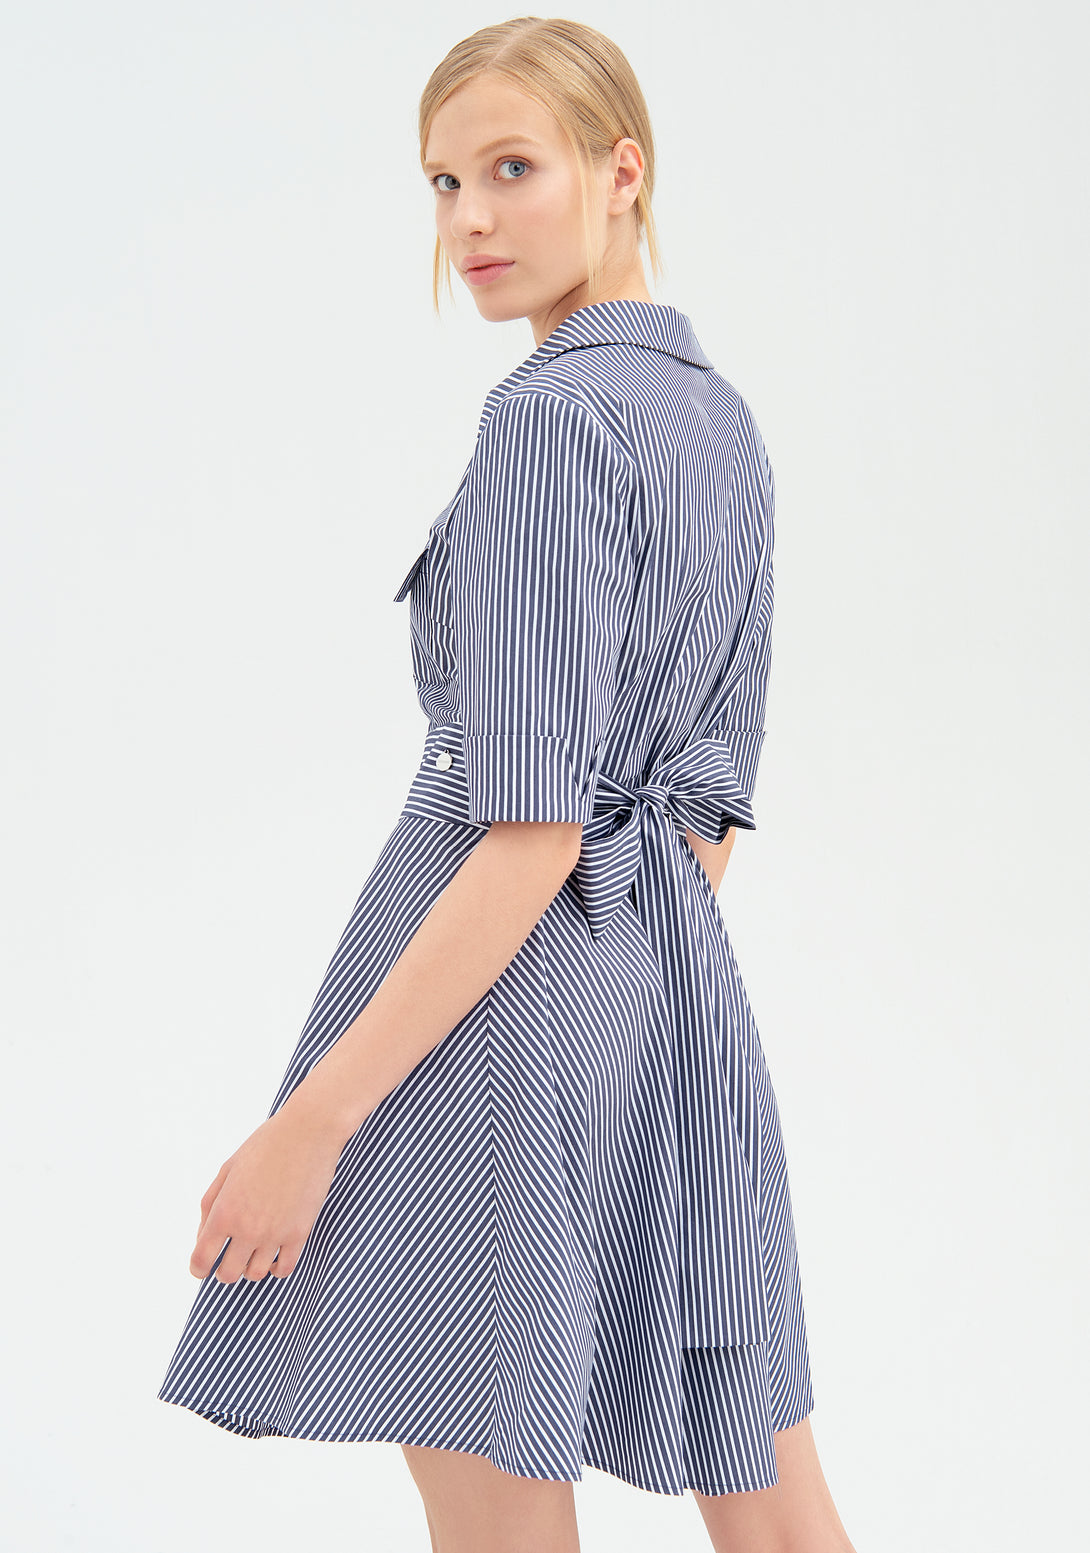 Chemisier dress regular fit with stripes